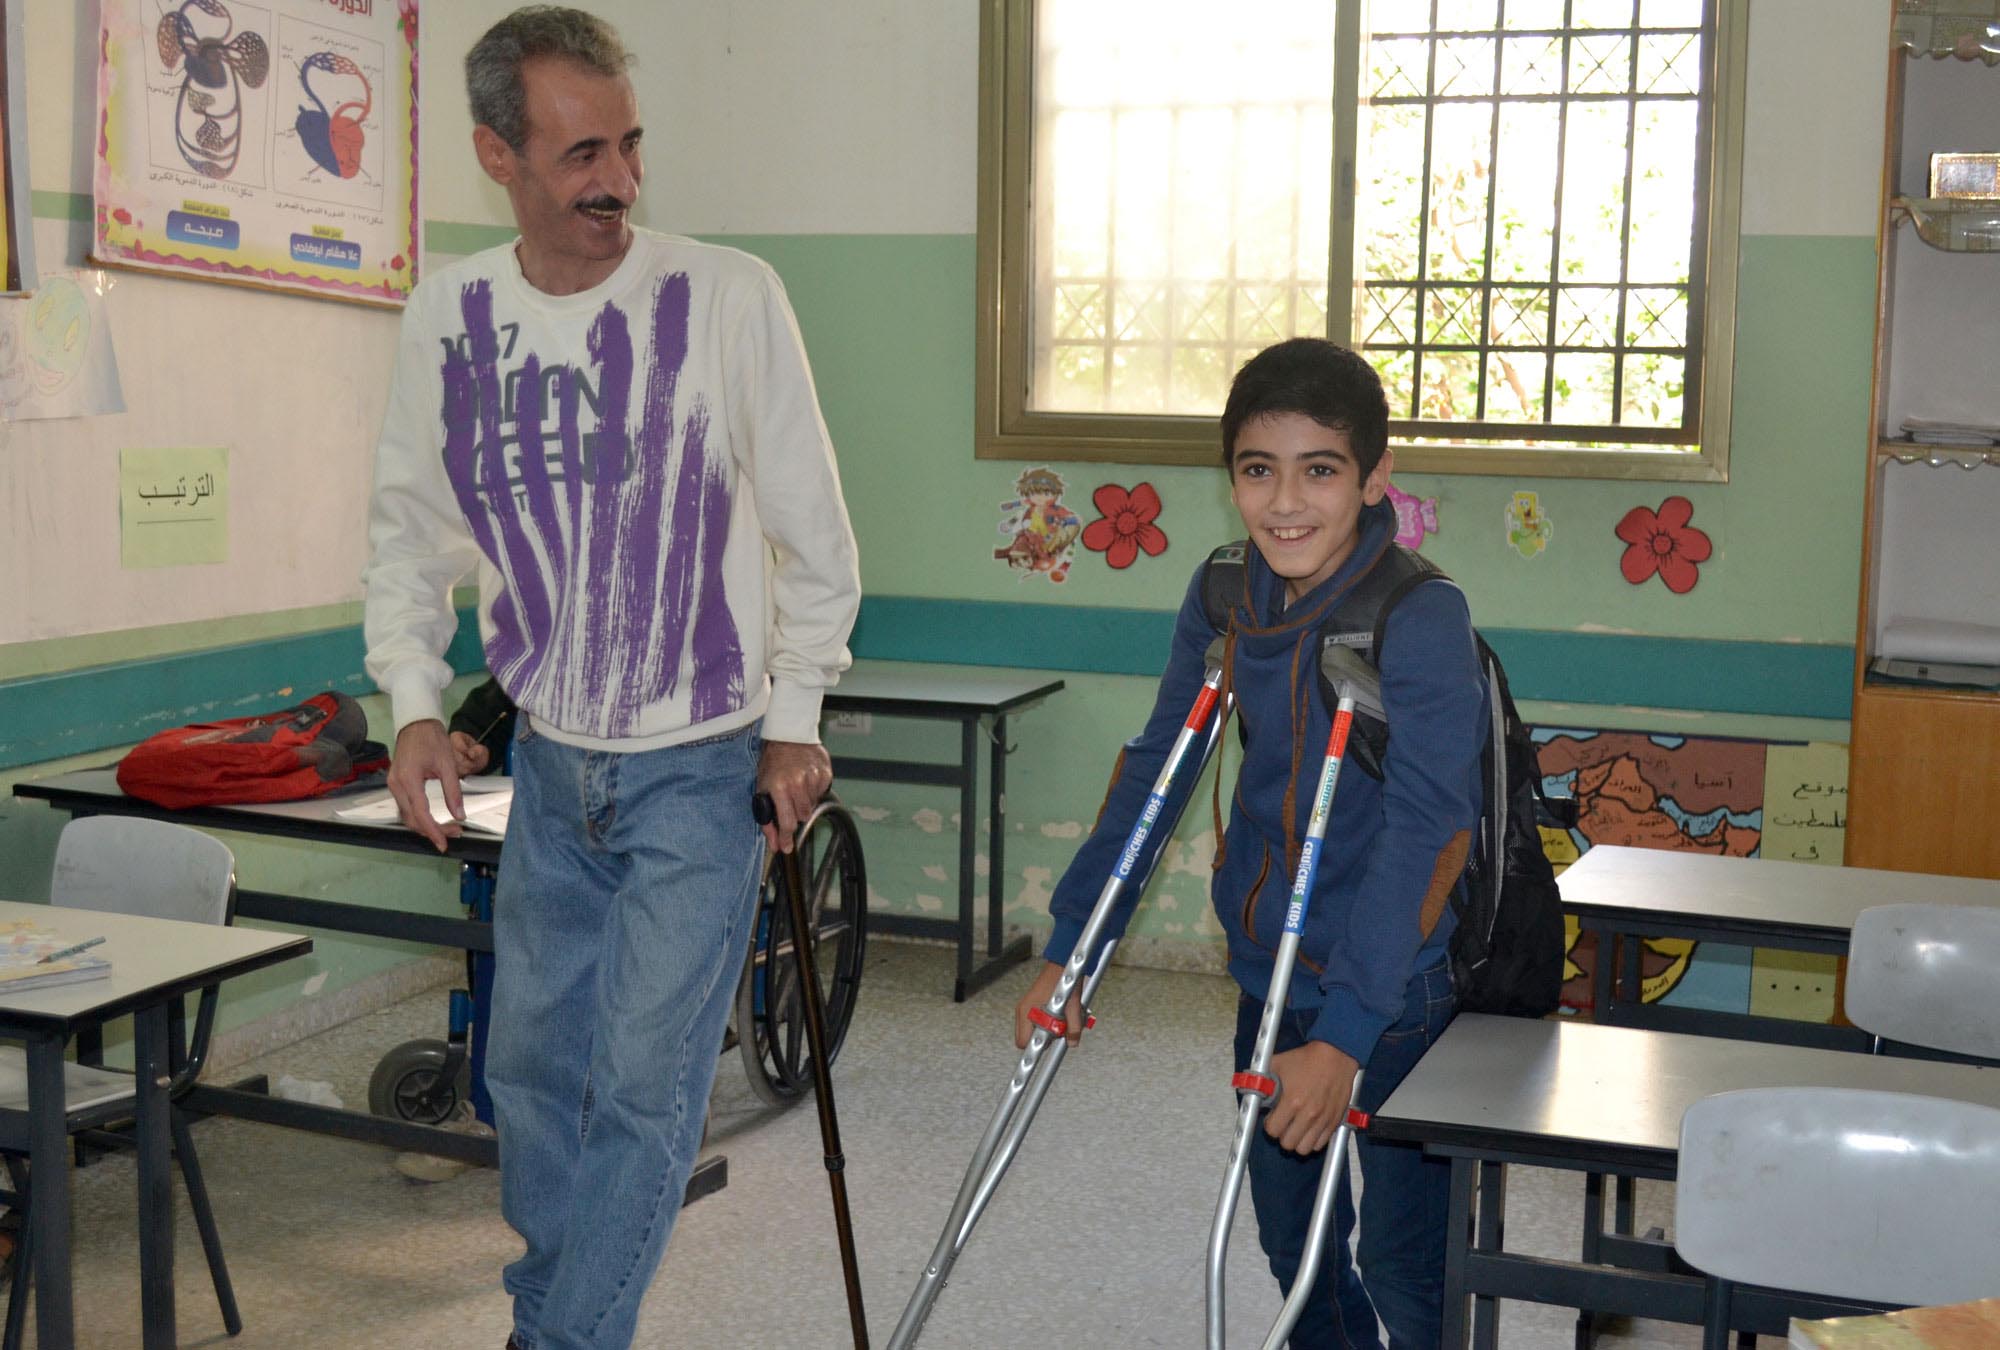 The director of Society for Handicapped in Gaza walks with his student, who now can move around more easily thanks to his new crutches from Anera.